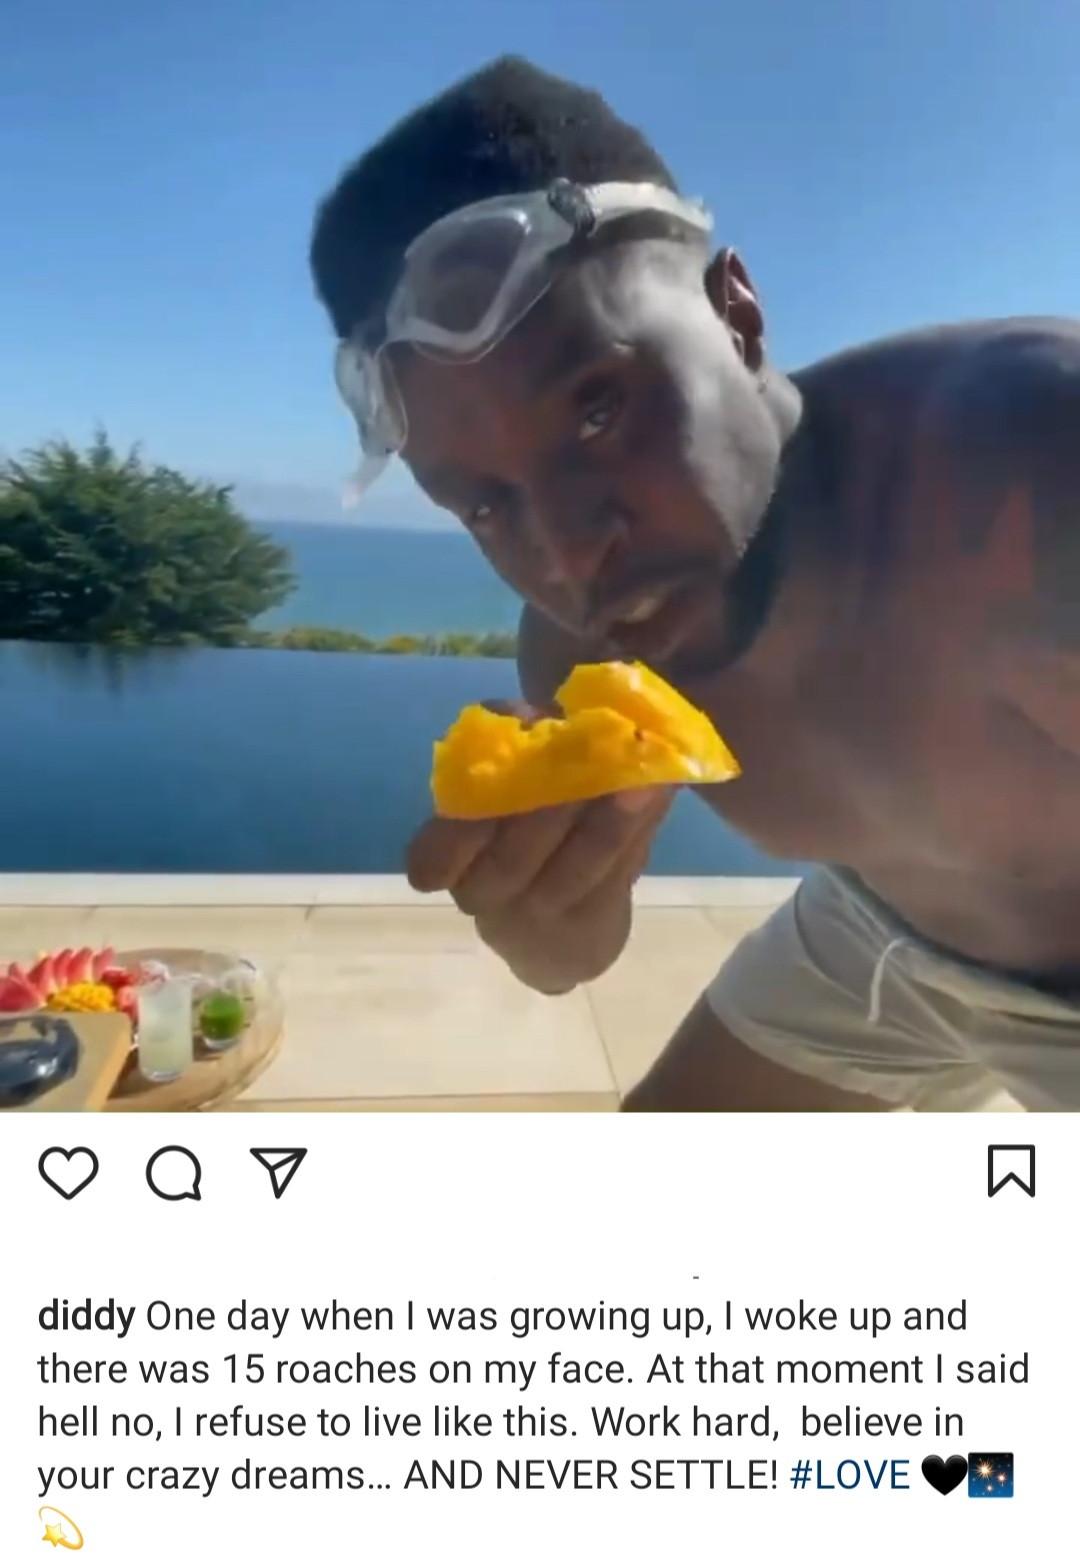 diddy poor experience